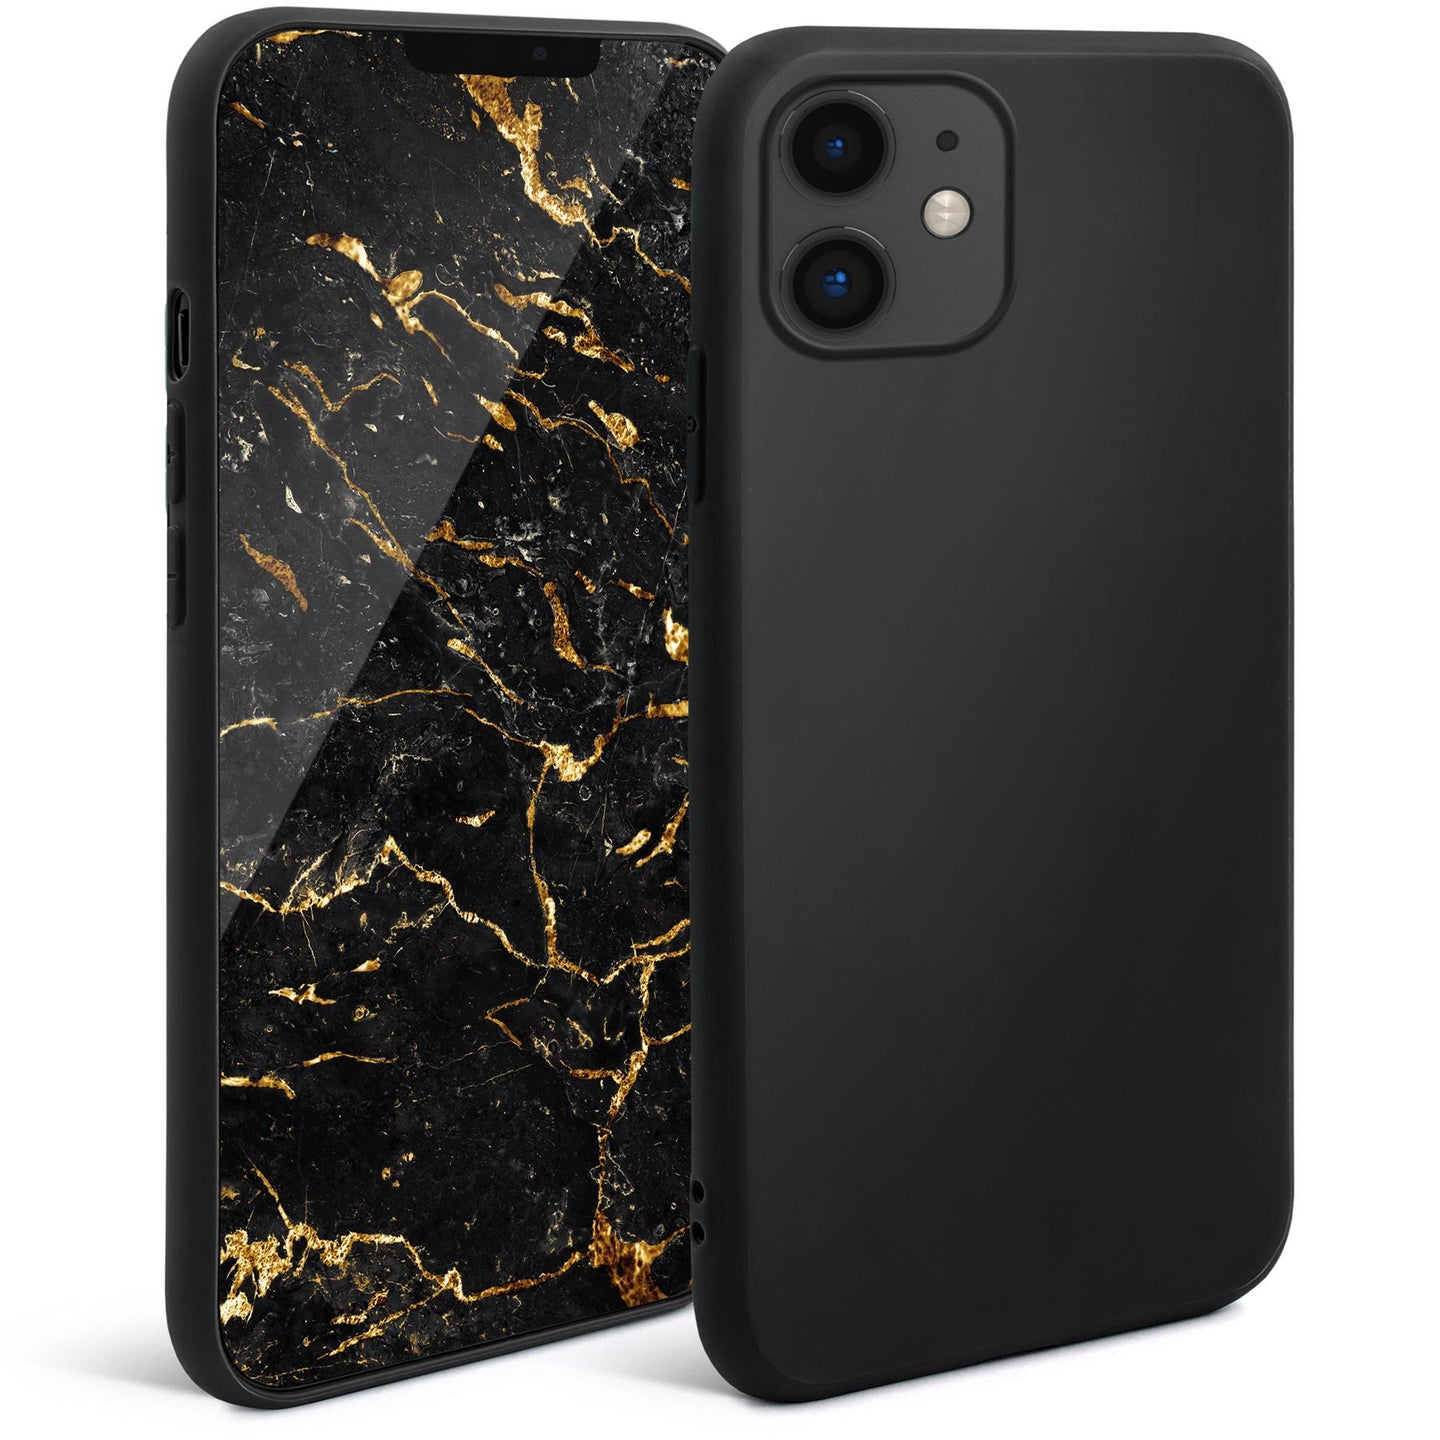 Moozy Minimalist Series Silicone Case for iPhone 11, Black - Matte Finish Slim Soft TPU Cover